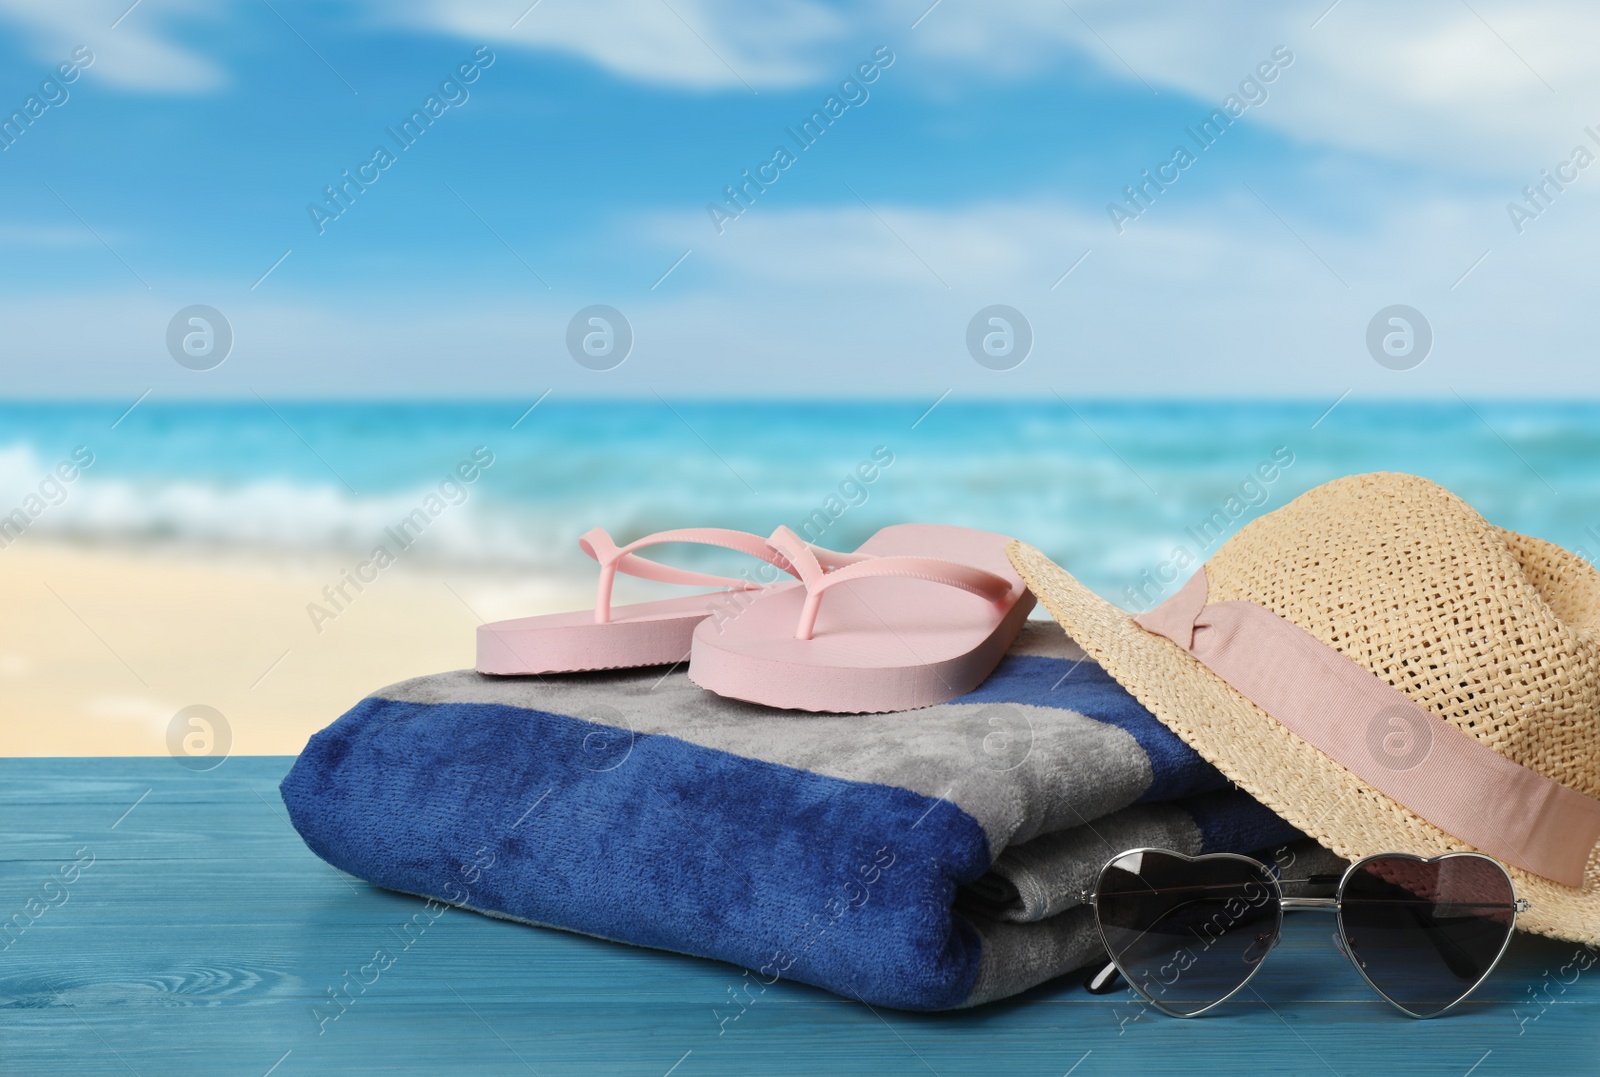 Image of Beach towel, flip flops, hat and heart shaped sunglasses on light blue wooden surface near seashore